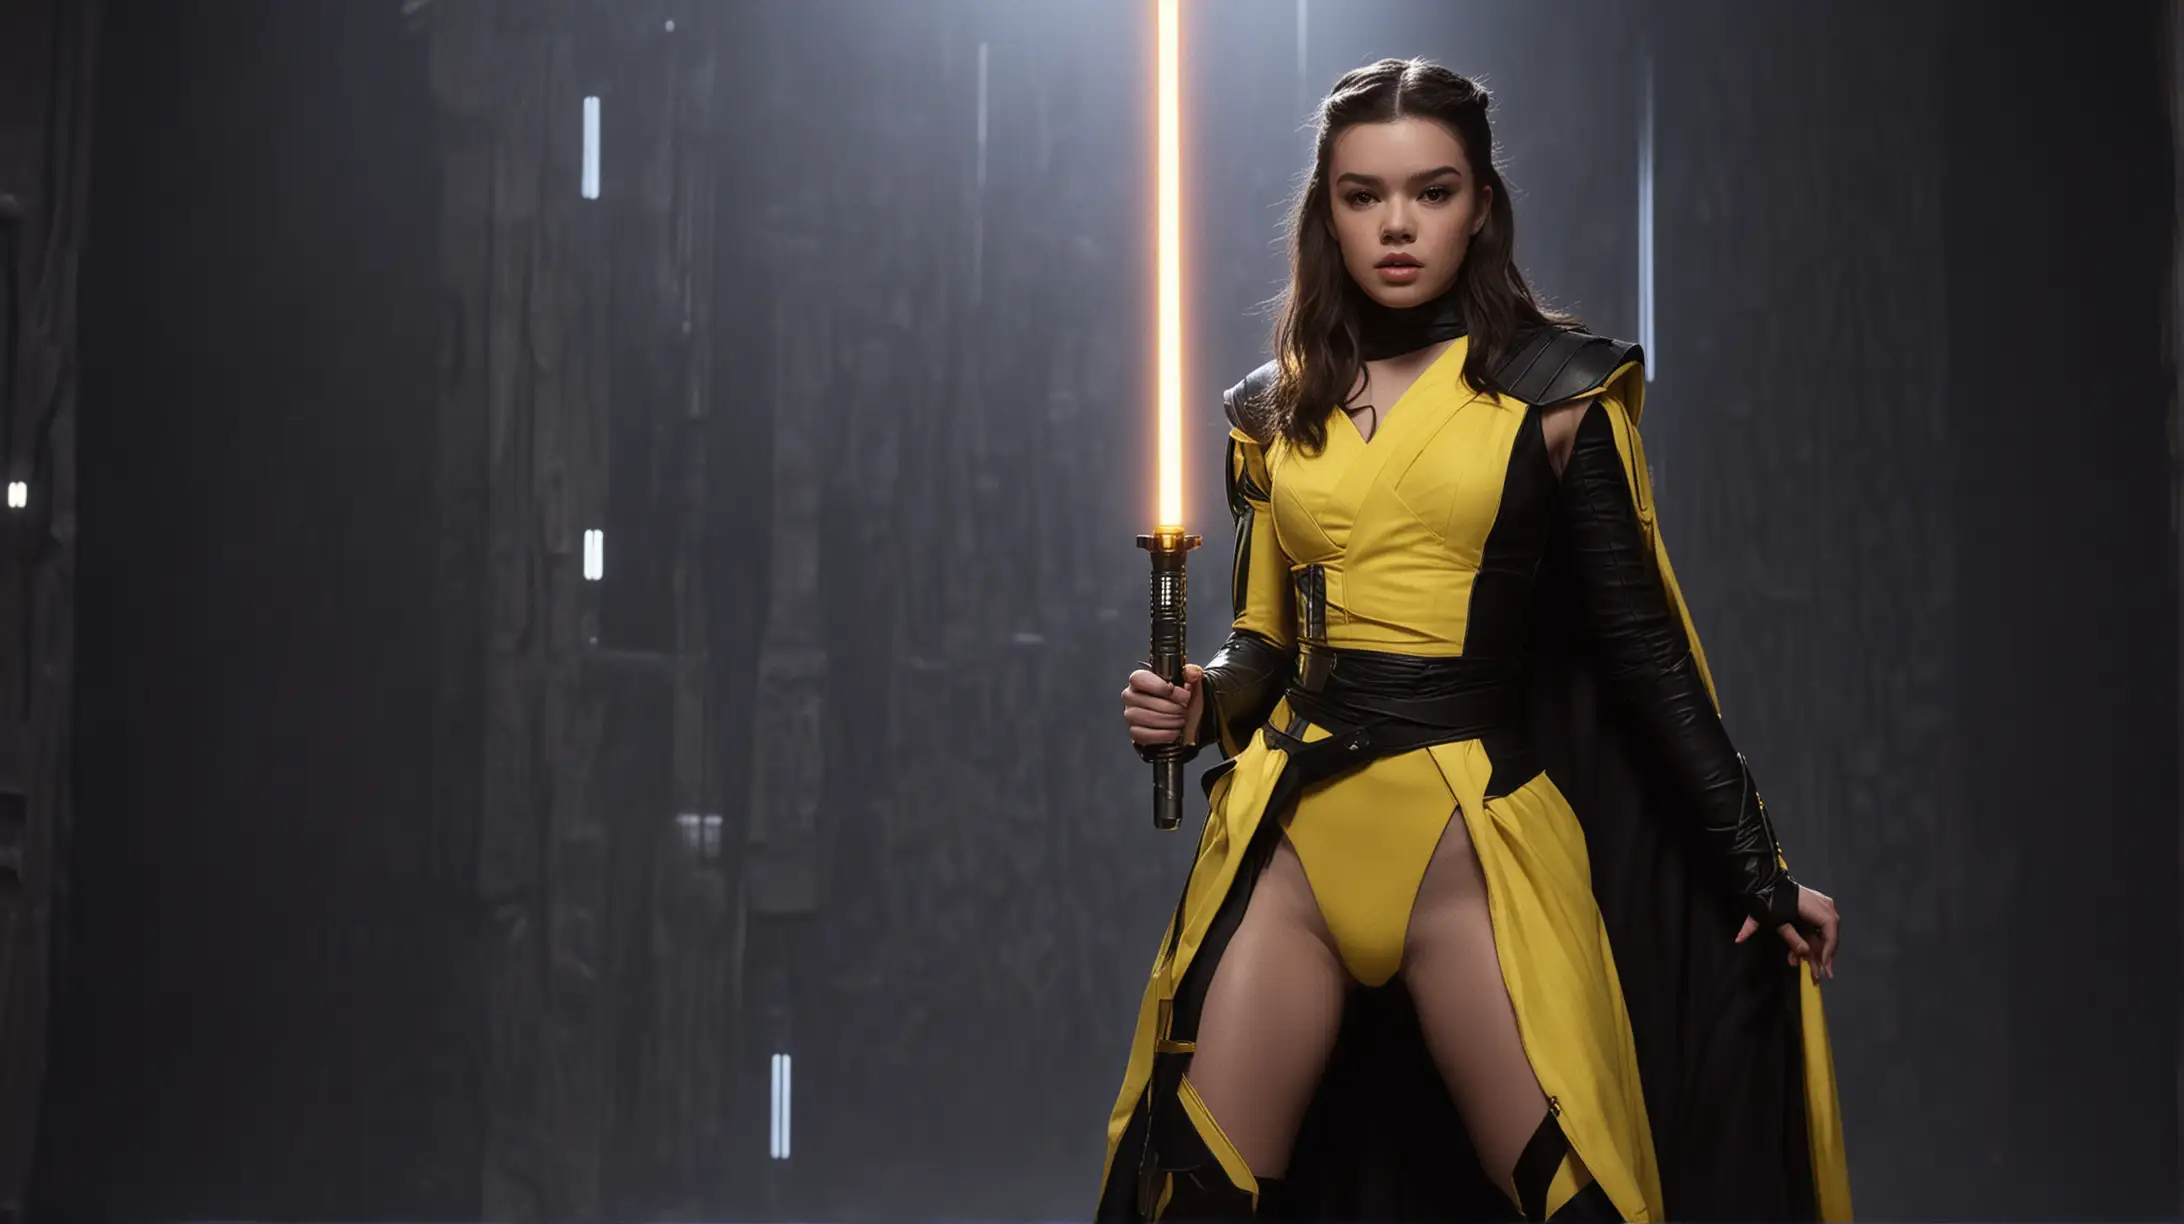 Hailee Steinfeld as Sith Queen, sexy black and yellow clothers, alone, lightsaber